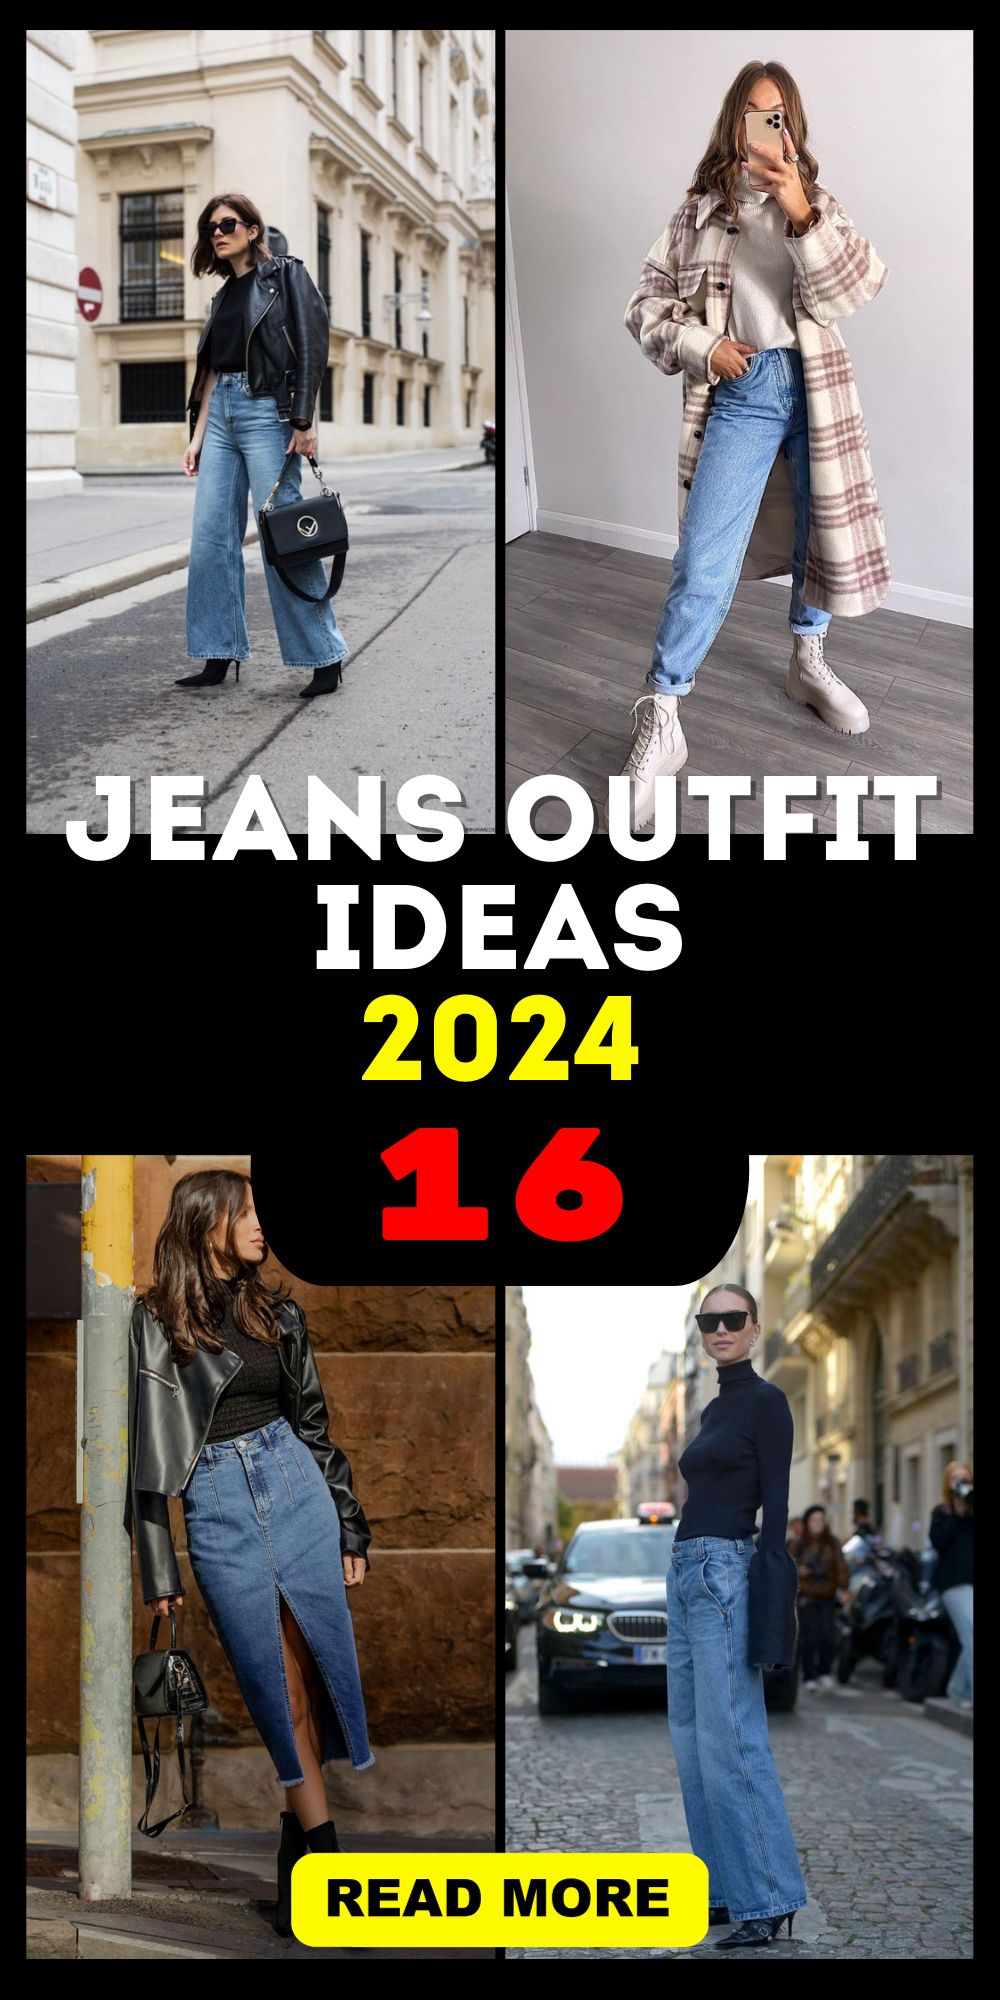 2024 Jeans Outfits Guide Trends & Styles for FashionForward Women